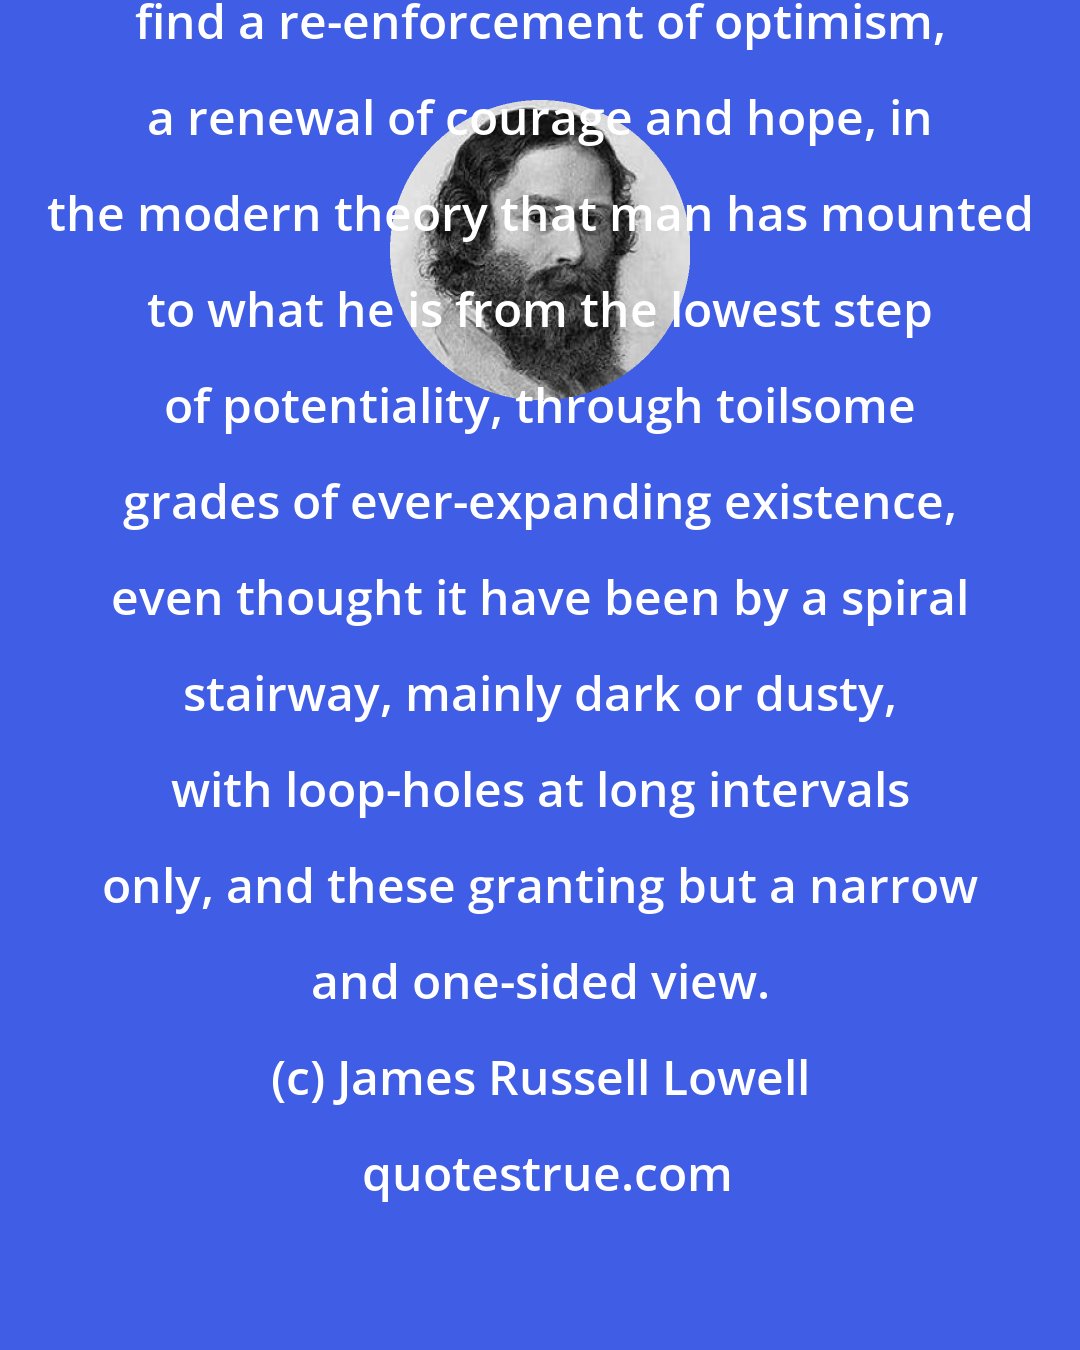 James Russell Lowell: To me it seems not unreasonable to find a re-enforcement of optimism, a renewal of courage and hope, in the modern theory that man has mounted to what he is from the lowest step of potentiality, through toilsome grades of ever-expanding existence, even thought it have been by a spiral stairway, mainly dark or dusty, with loop-holes at long intervals only, and these granting but a narrow and one-sided view.